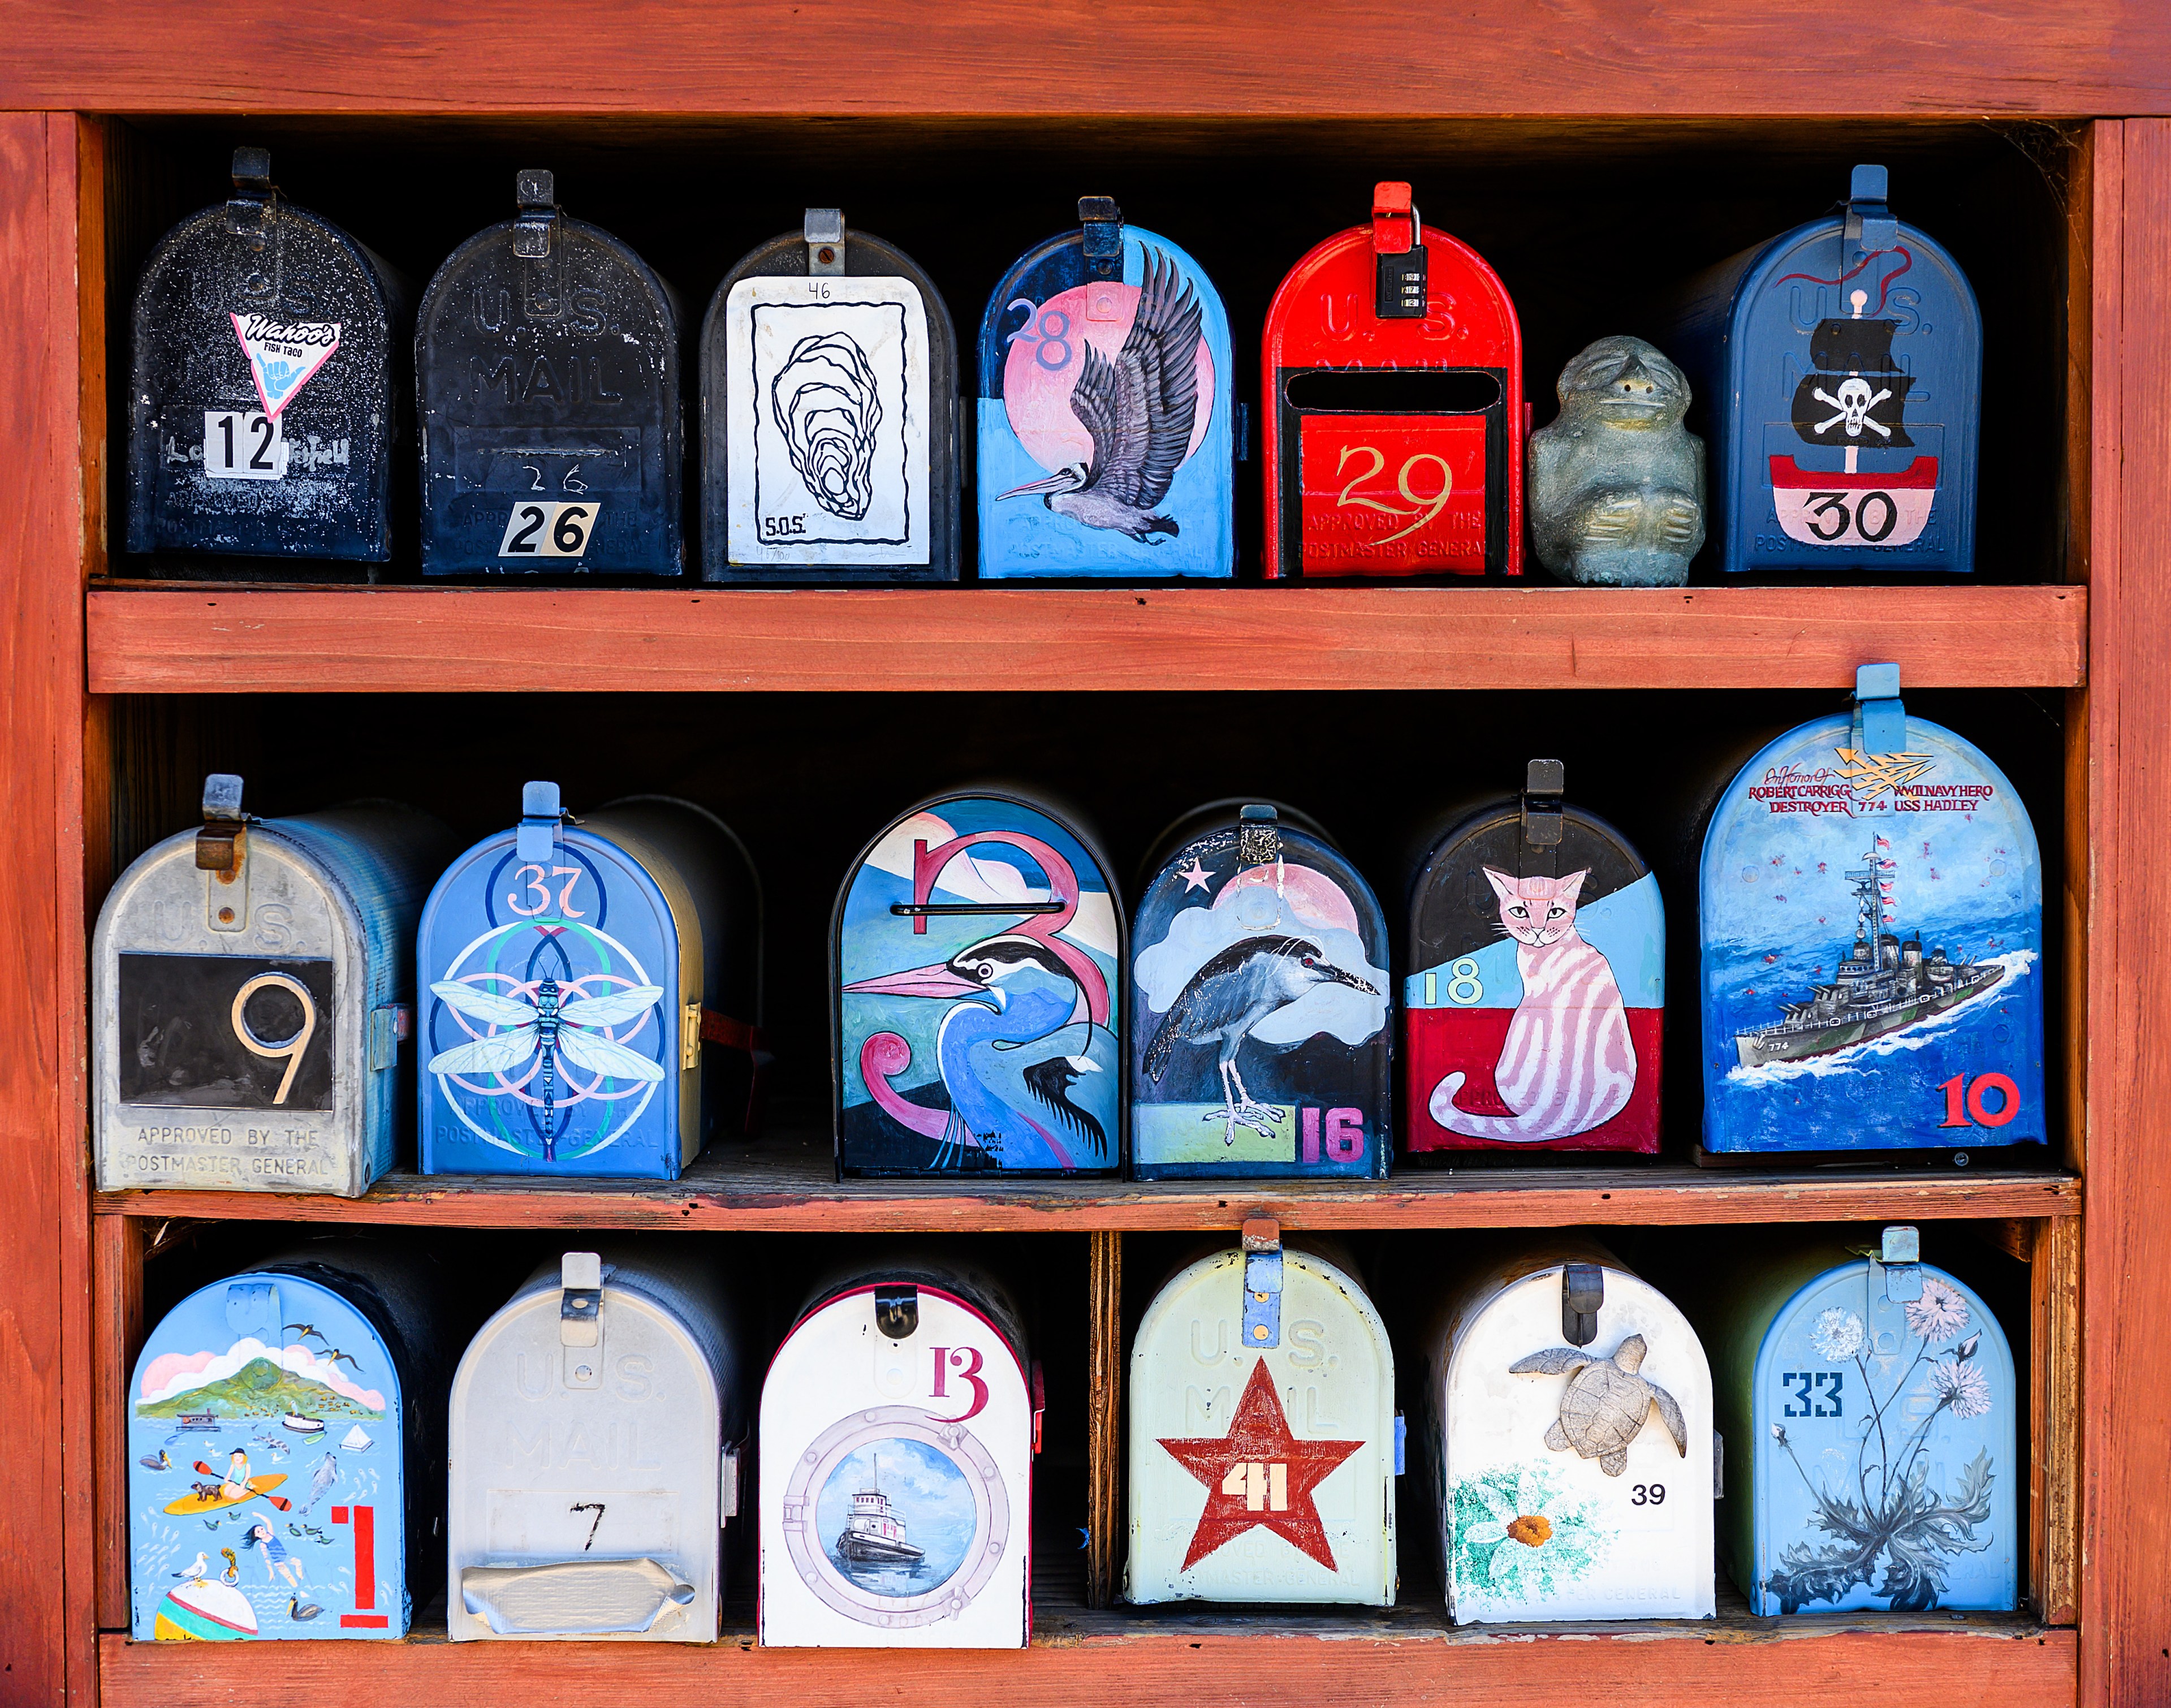 A collection of uniquely painted mailboxes displayed on shelves, each featuring different designs, colors, and numbers.